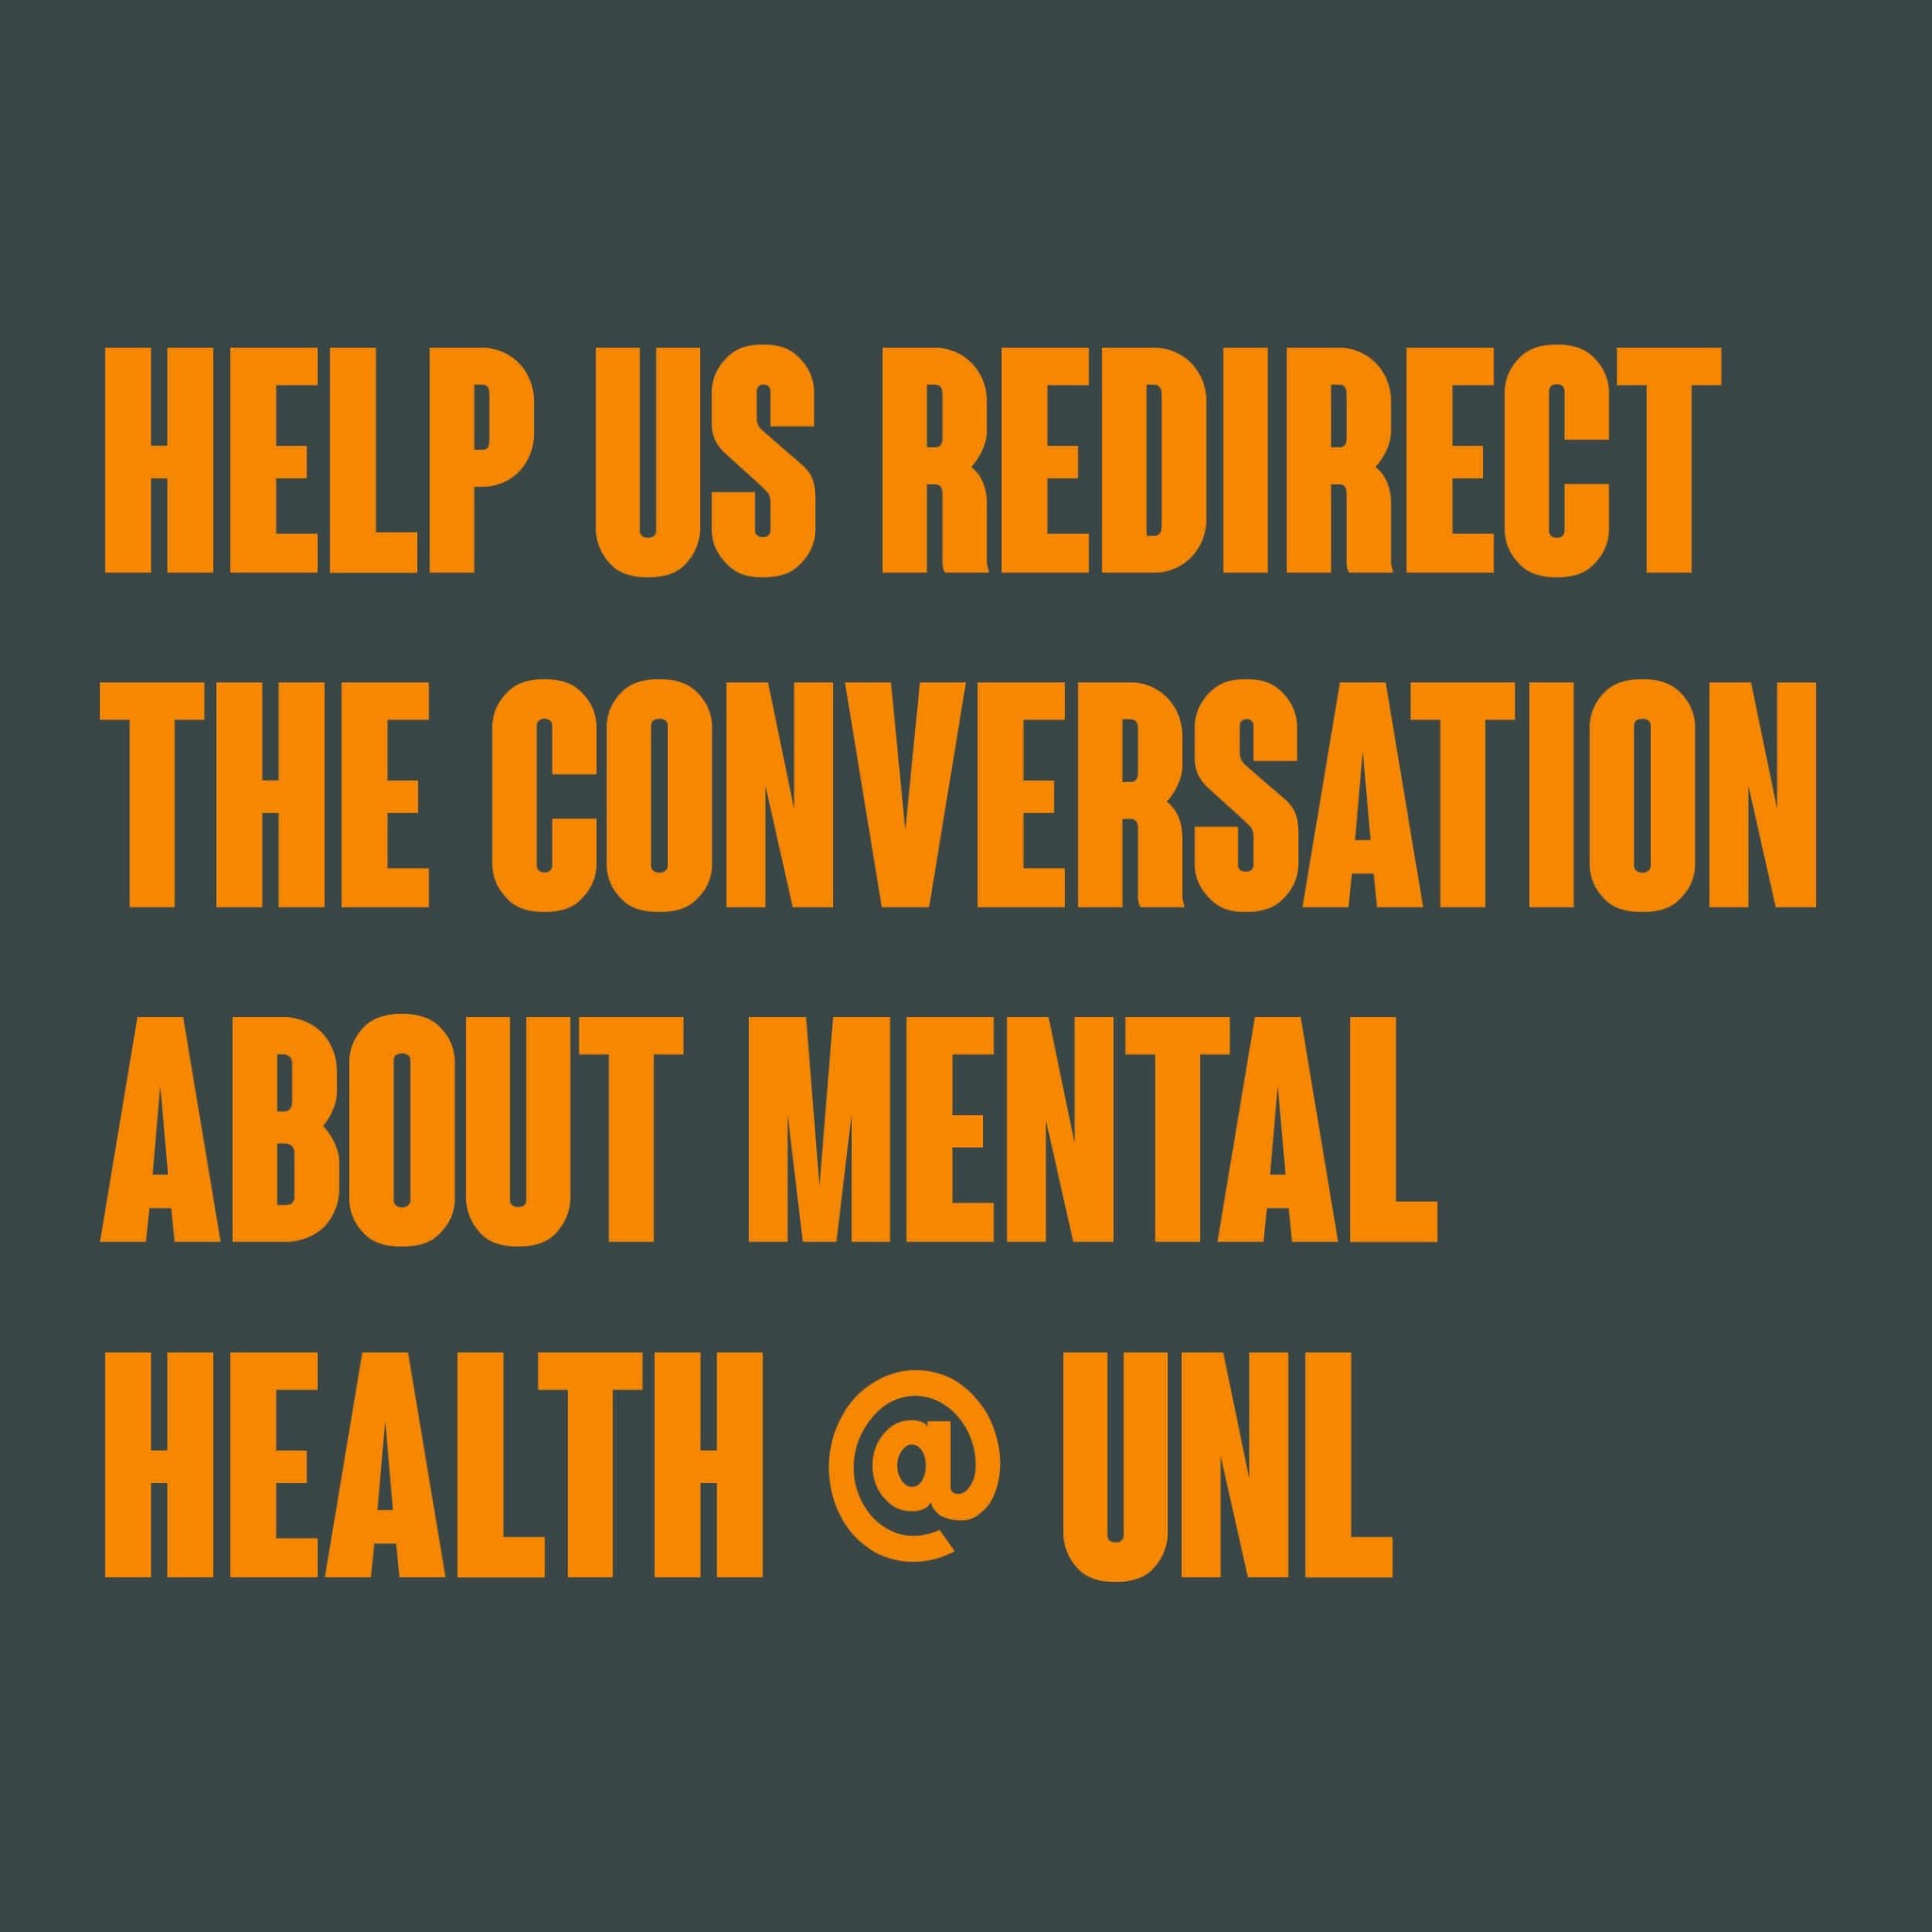 Help us redirect the conversation about mental health at UNL